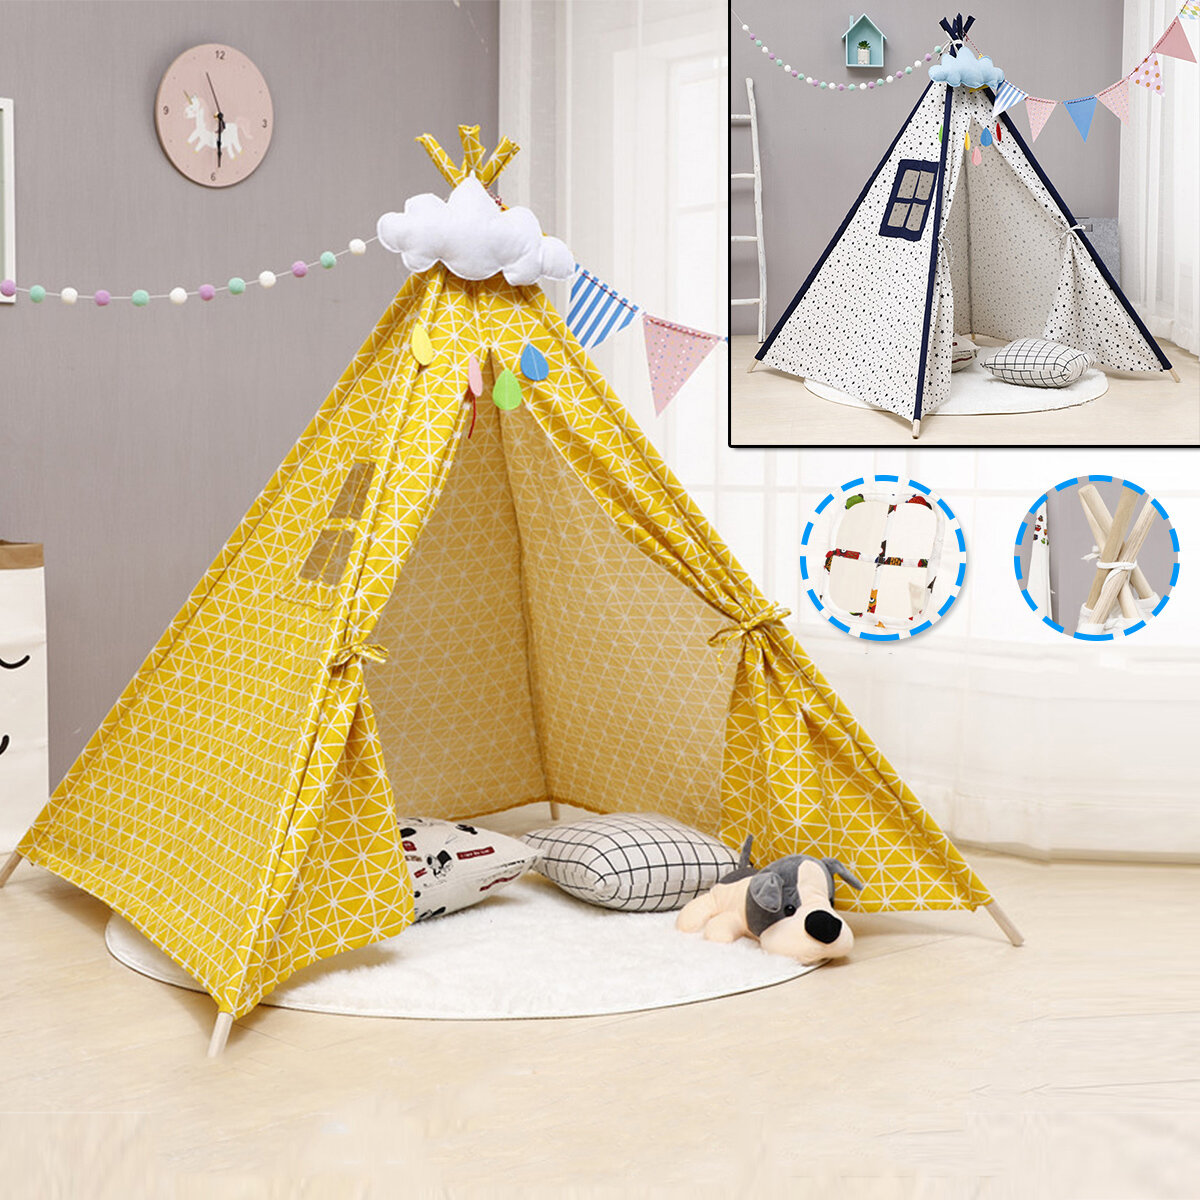 

Teepee Children Playhouse Kids Play Tent Natural Cotton Canvas Gift for Boys Girls Indoor Outdoor Tent